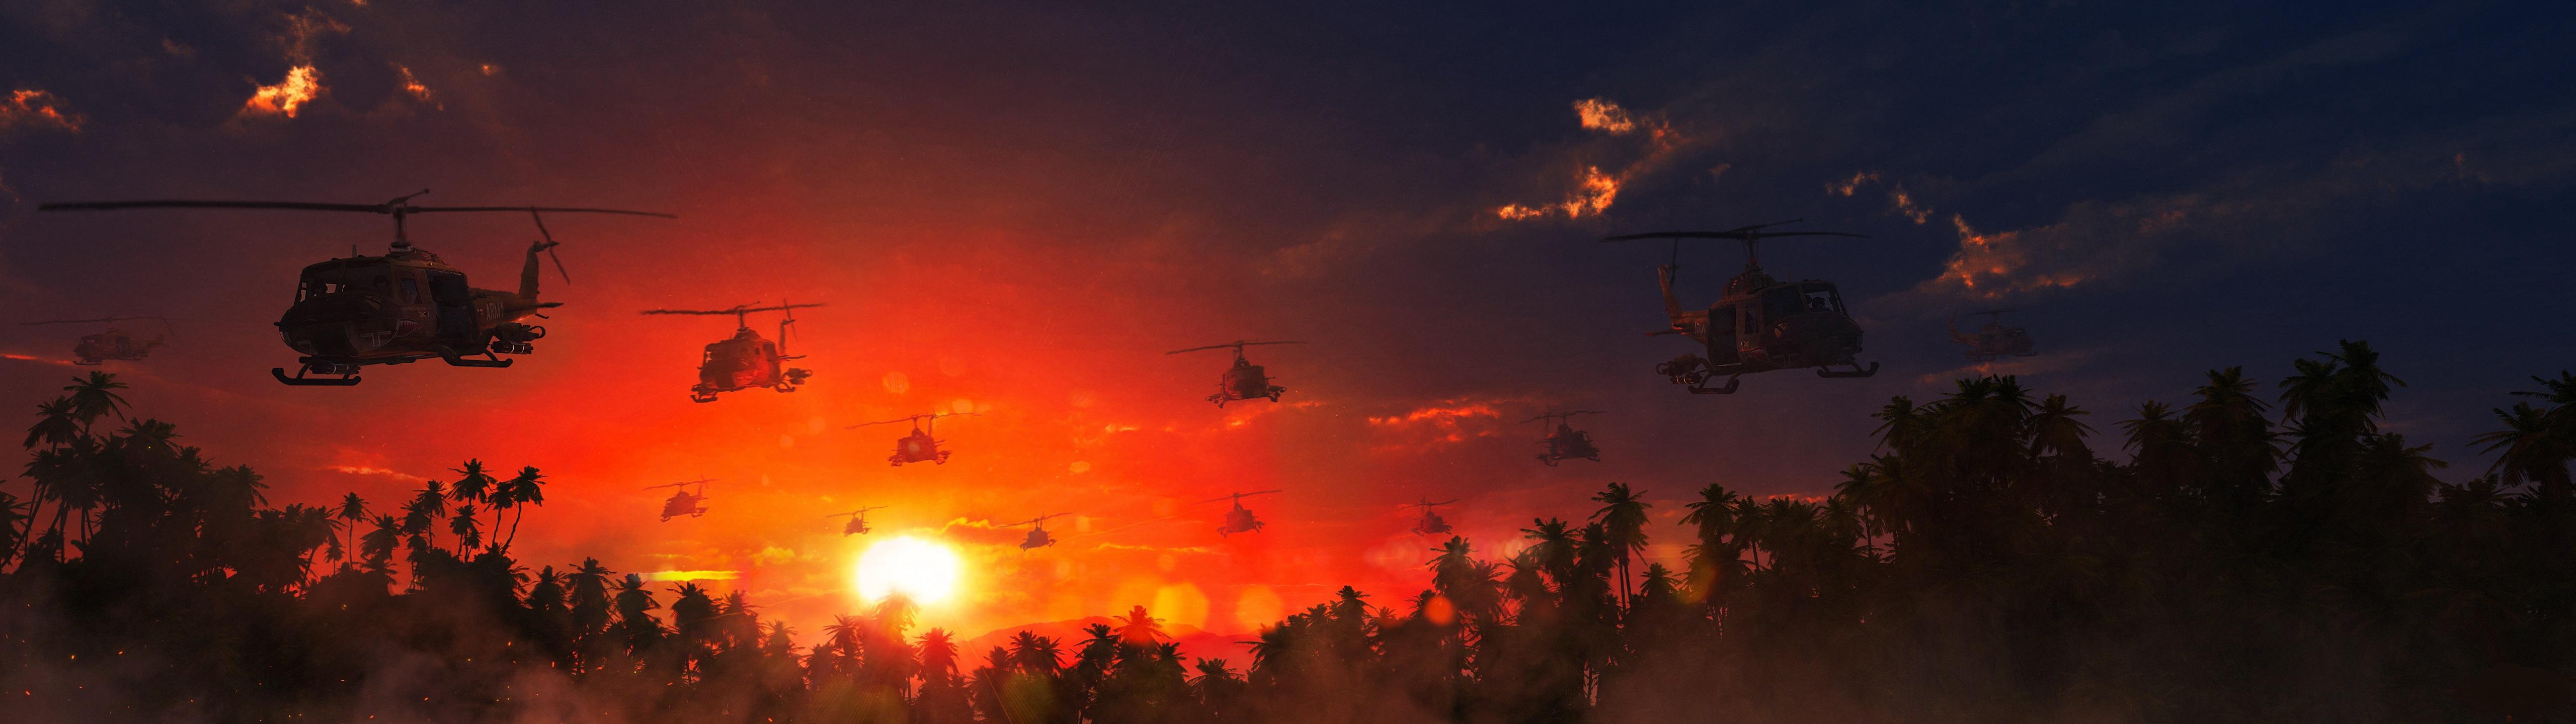 Image Helicopters US Vietnam War Sunrises and sunsets 5120x1440